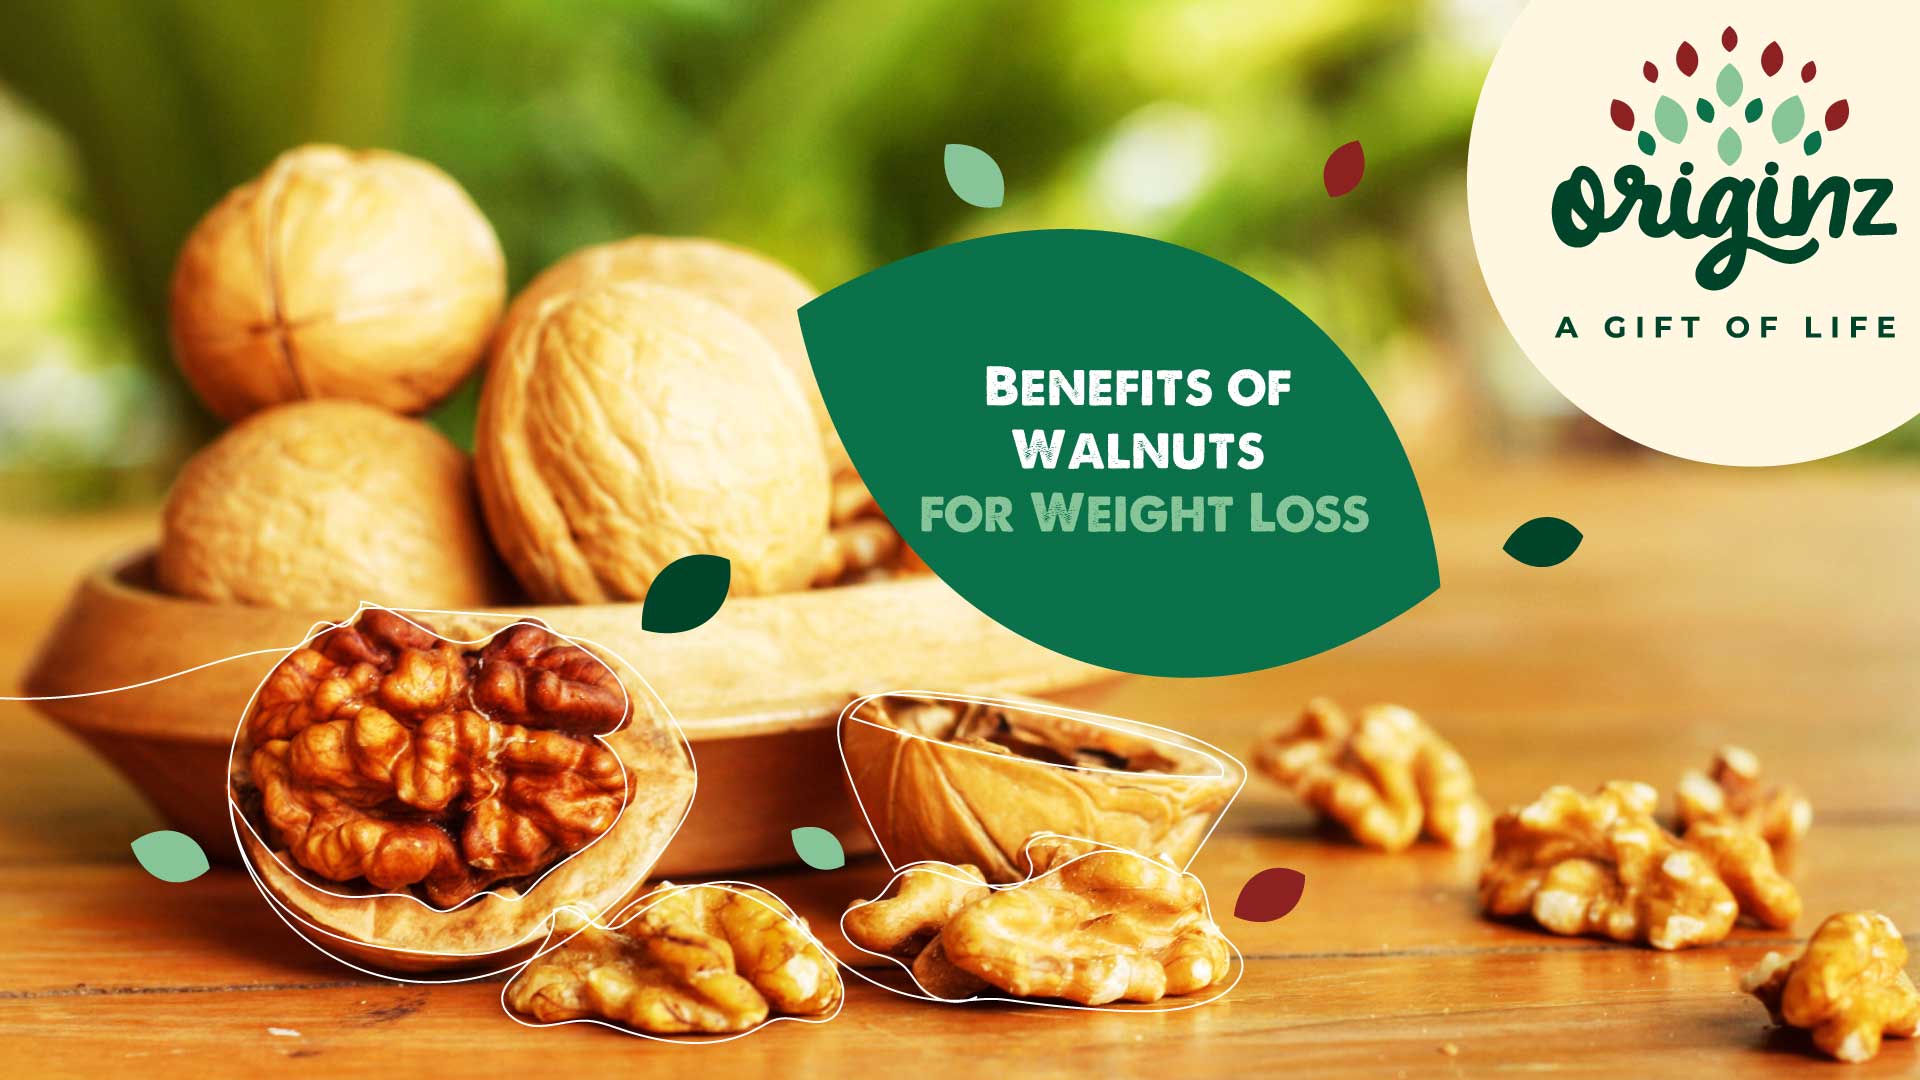 Benefits of Walnuts for Weight Loss